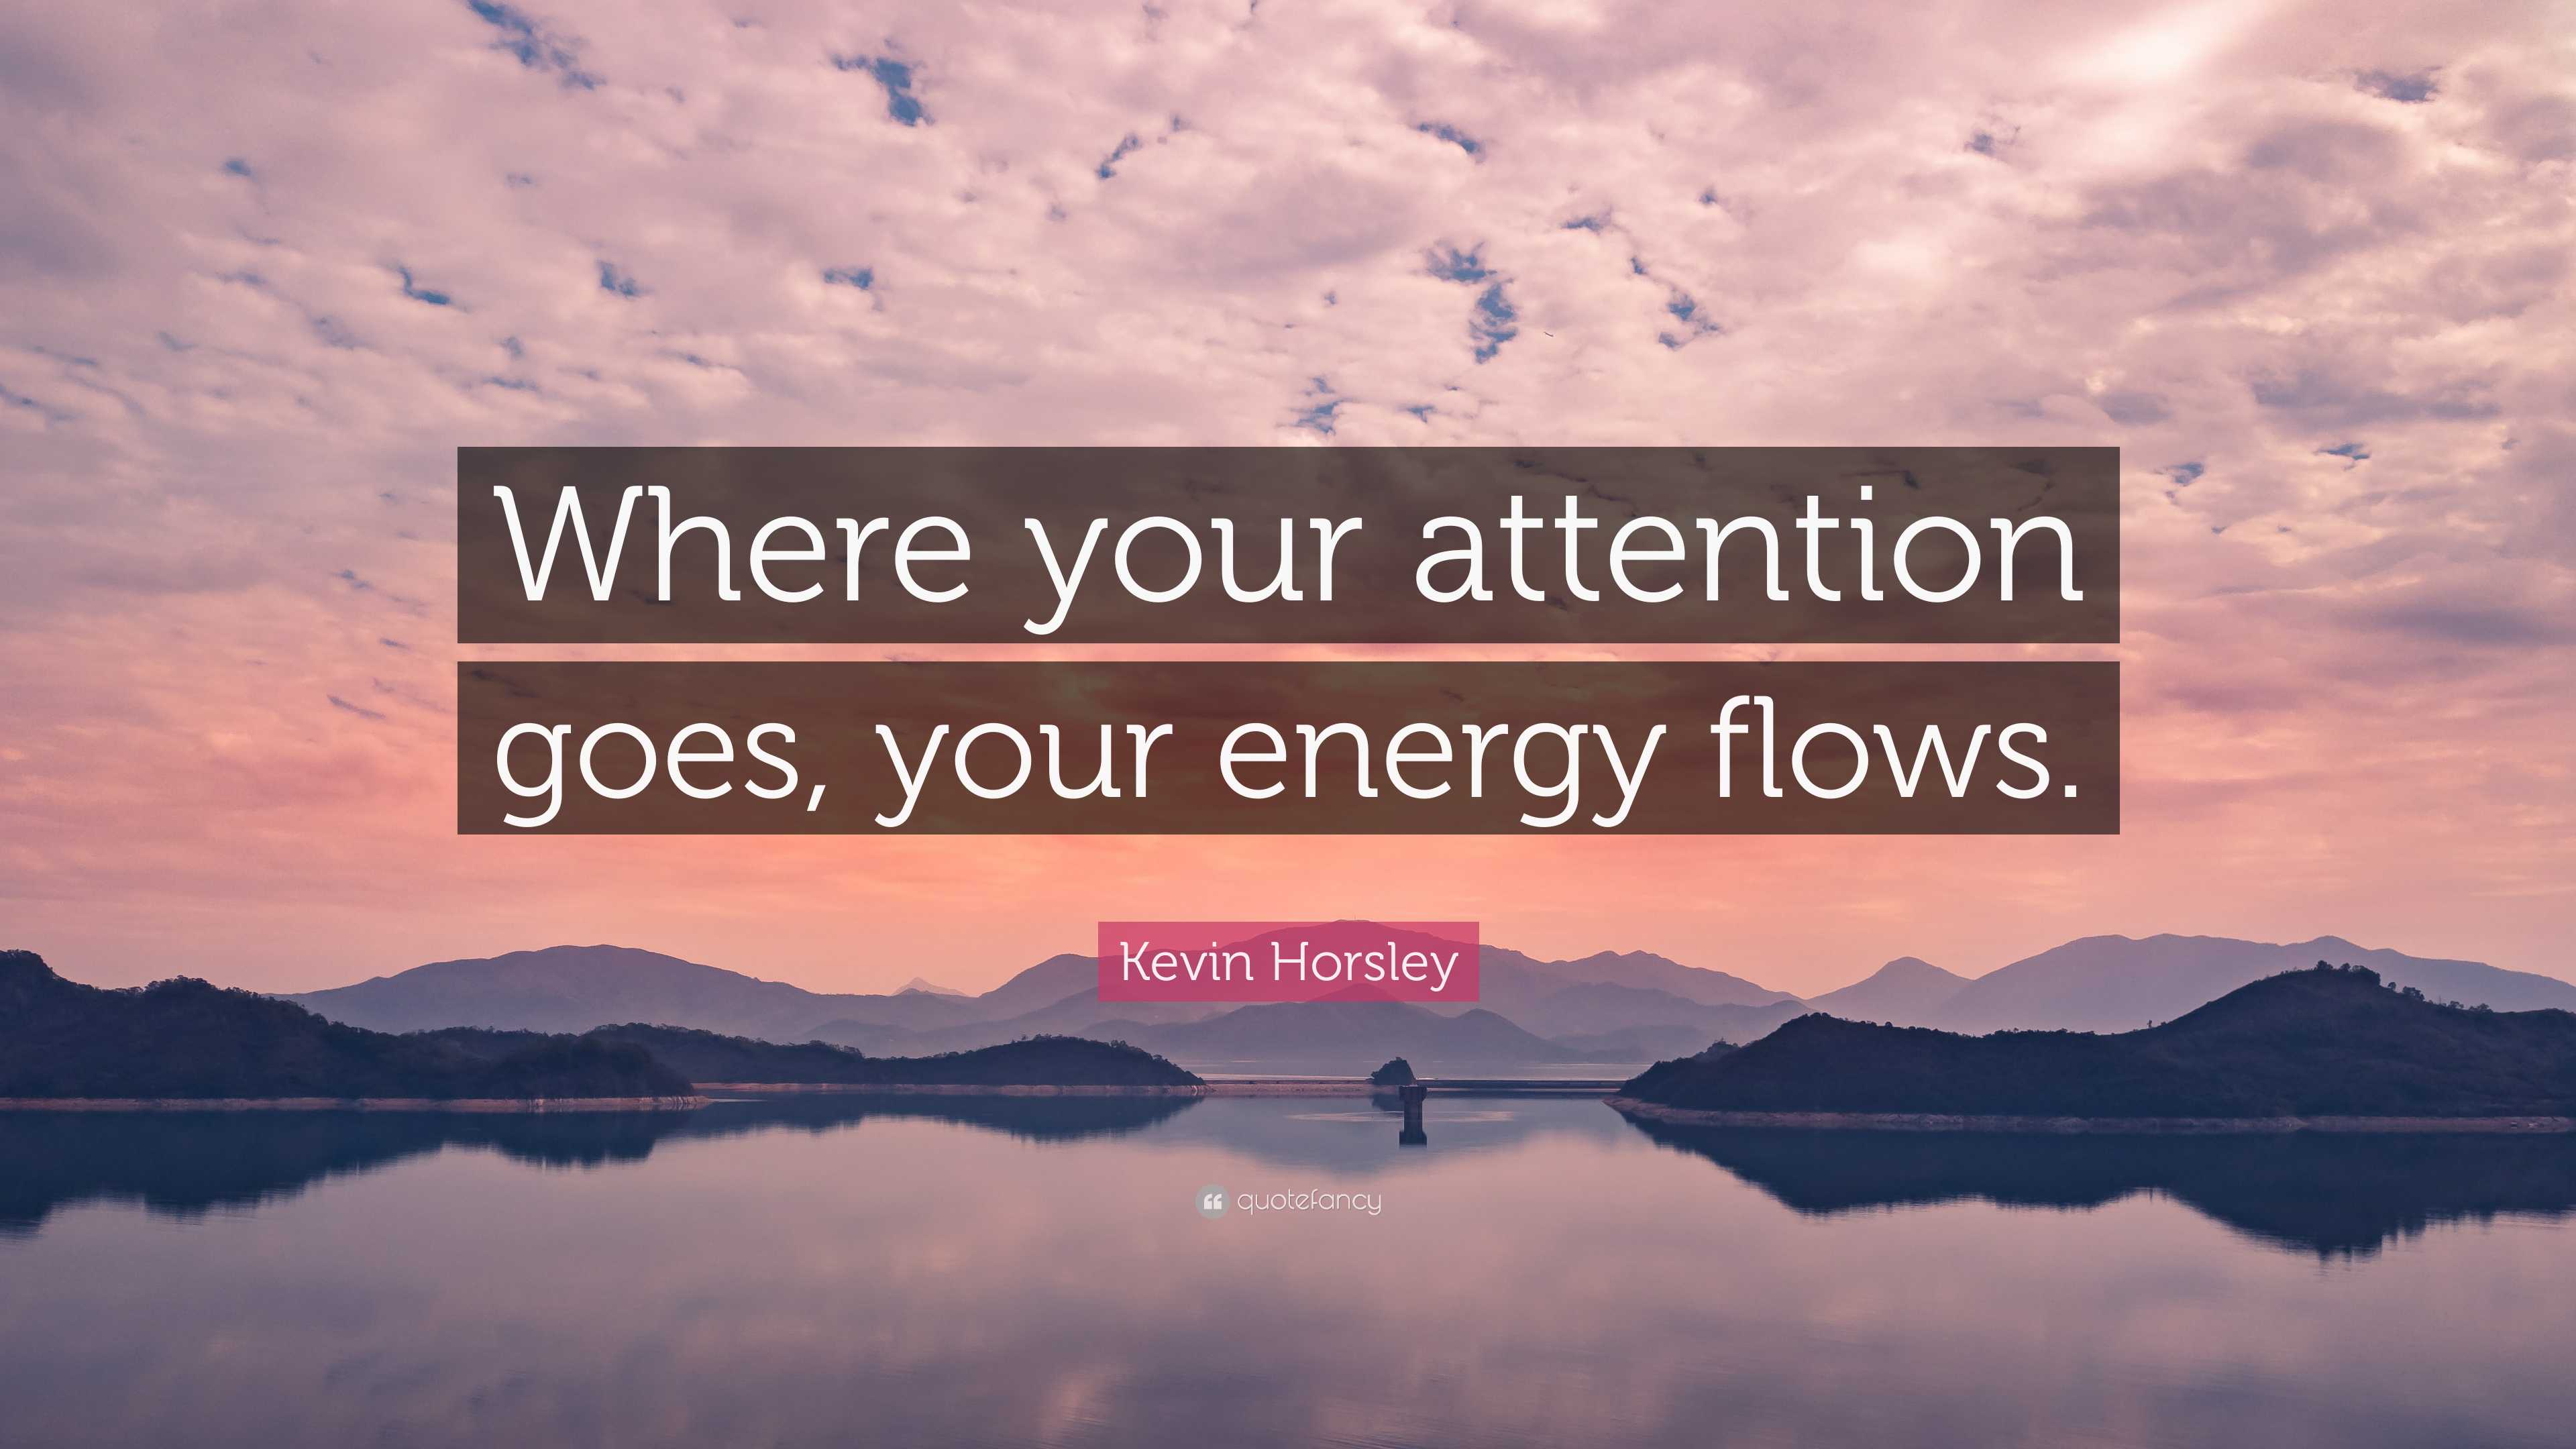 Where your attention goes, your energy flows. Focus wisely